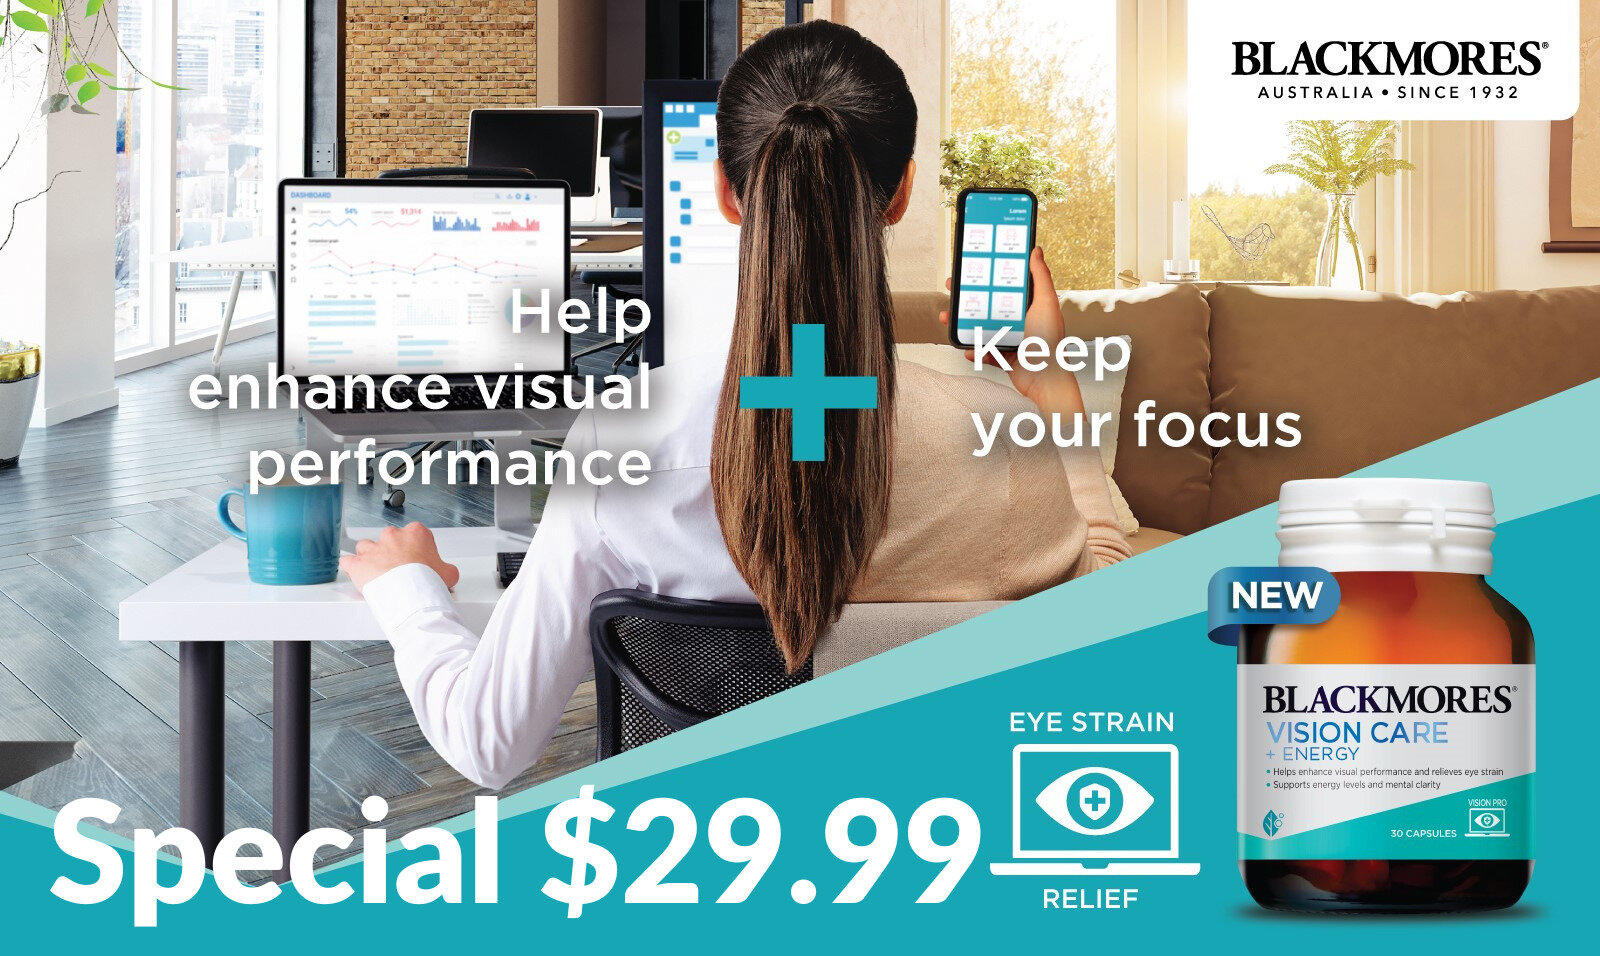 Blackmores Vision Care now $29.99